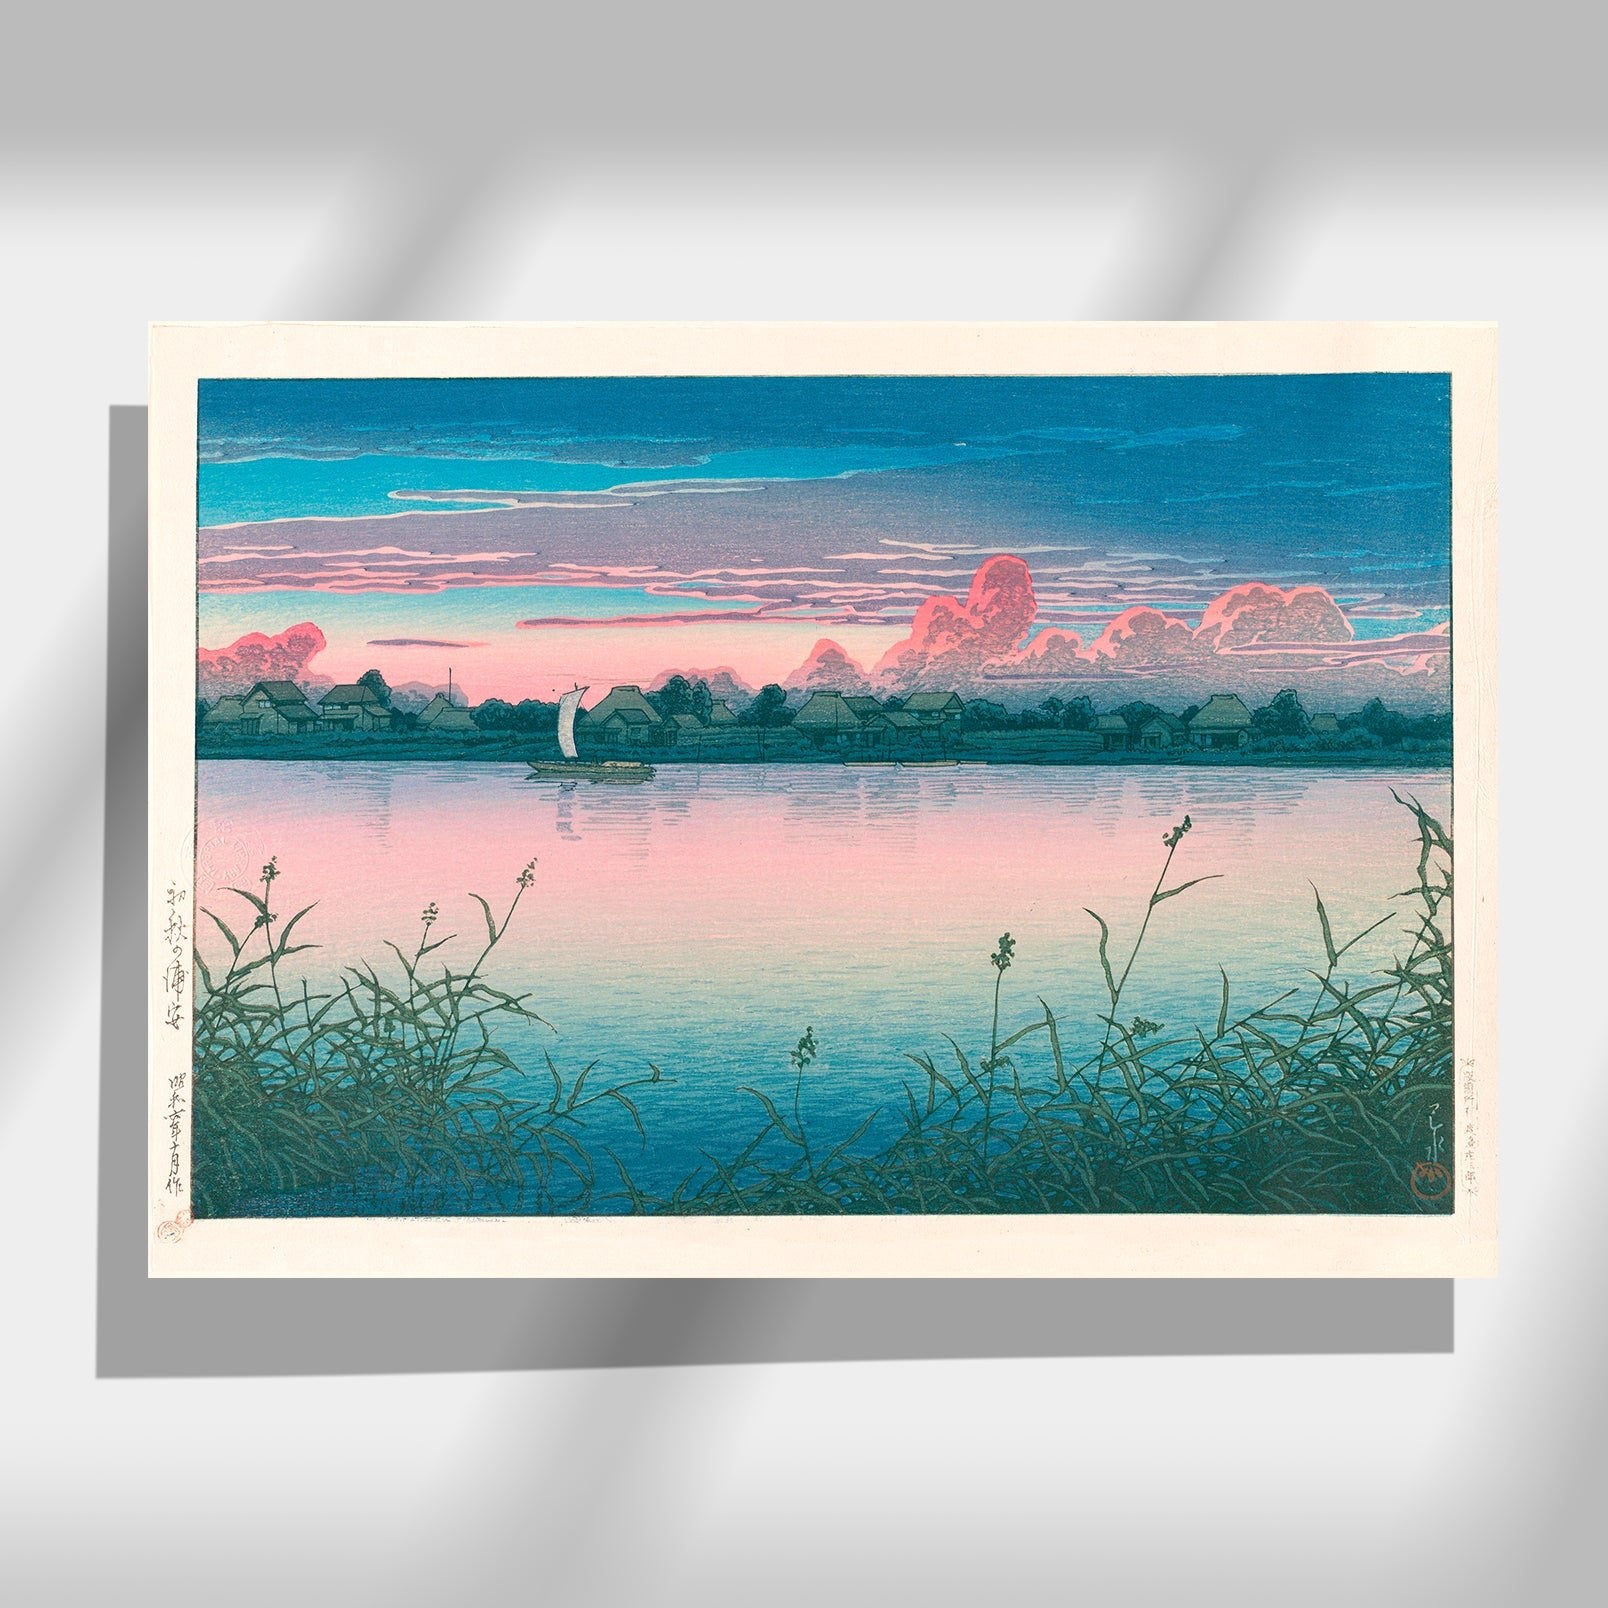 Kawase Hasui&#39;s Japanese Art Poster: A breathtaking sunset painting reflecting on the tranquil water